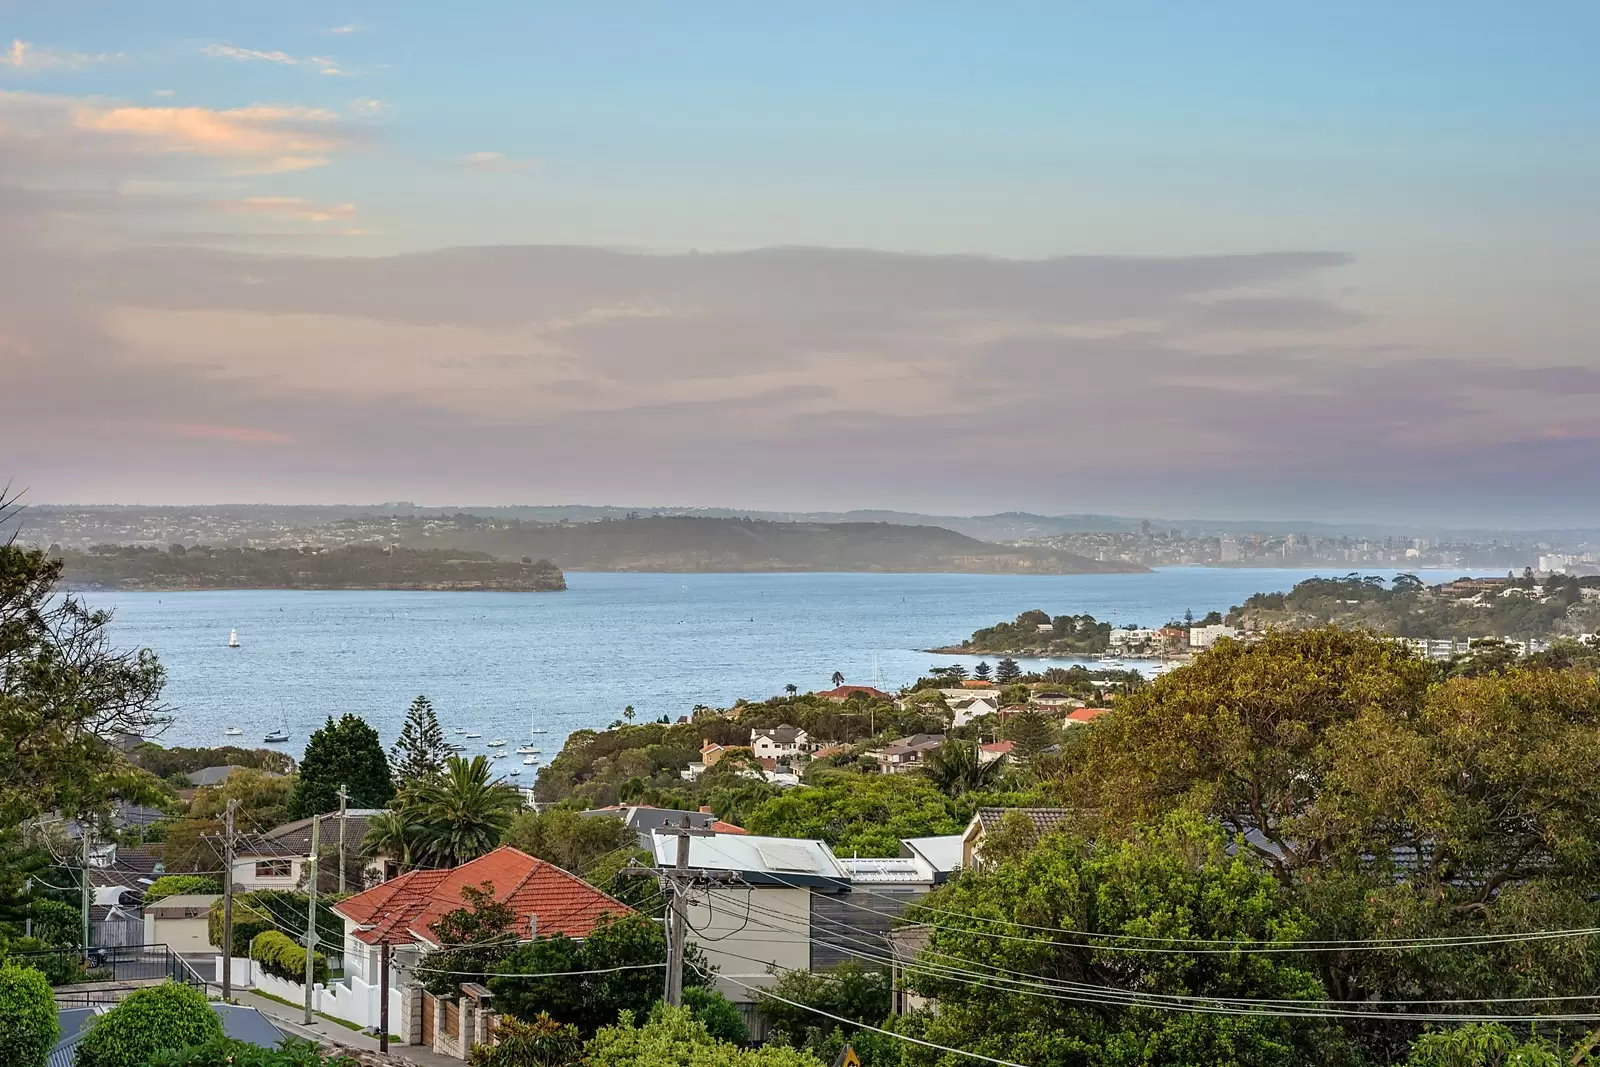 Photo #12: 2 Village Lower Road, Vaucluse - Sold by Sydney Sotheby's International Realty